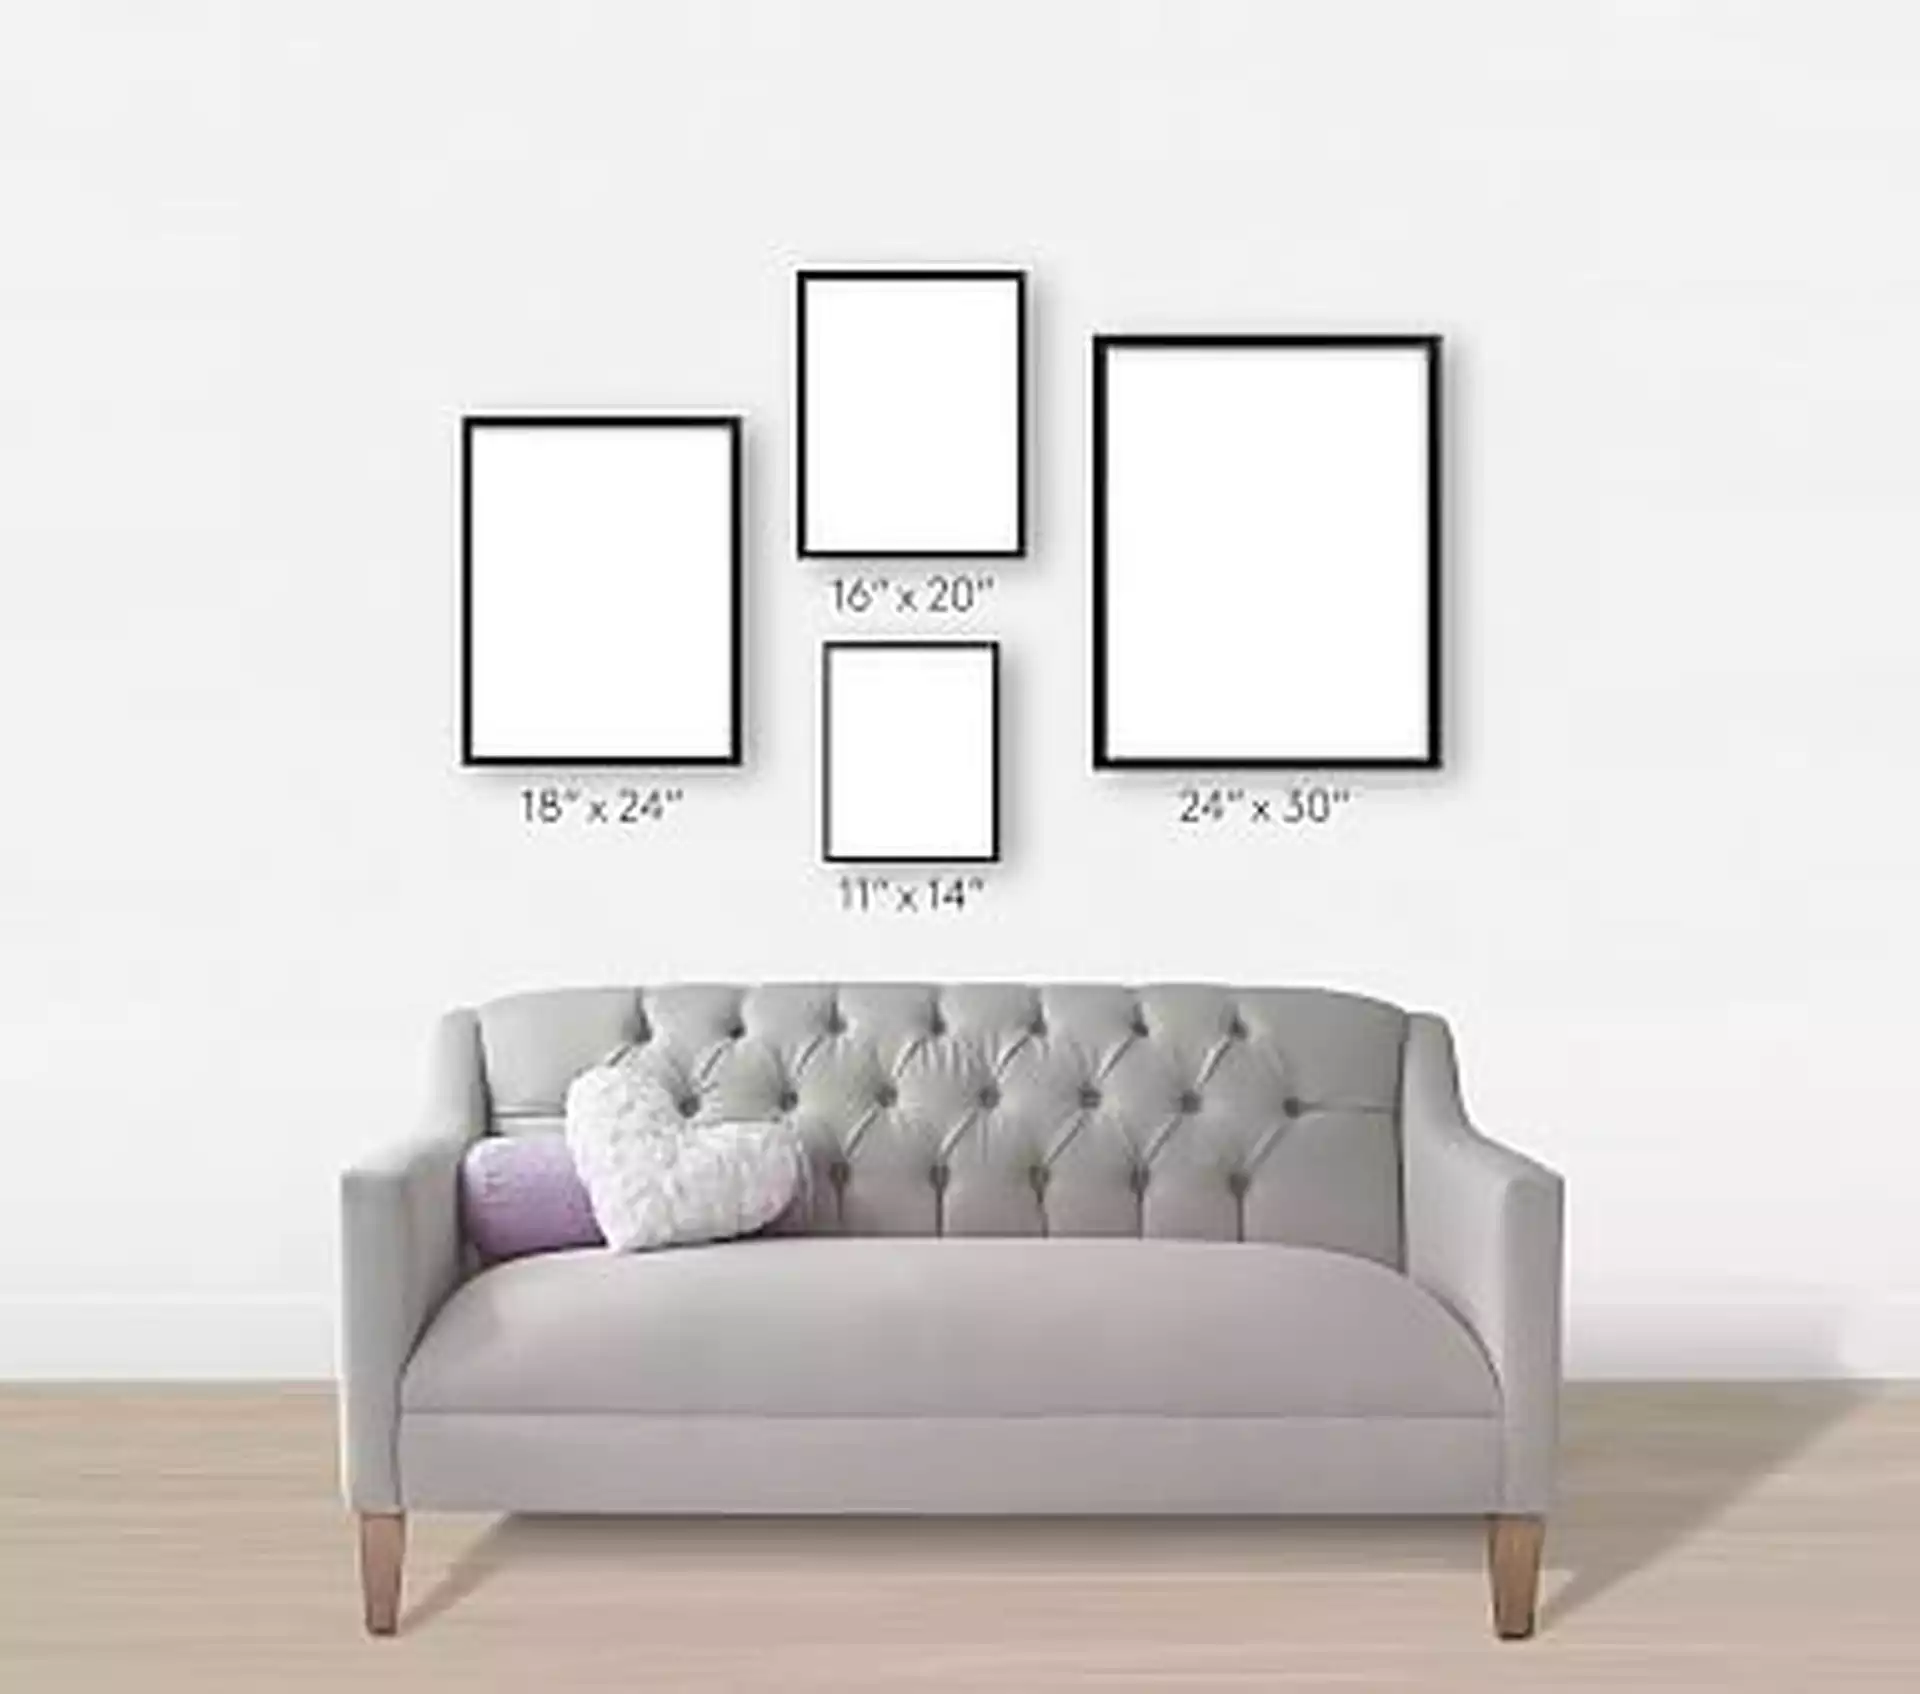 Minted(R) Sounds Wall Art by Pixel and Hank, 24x30, White